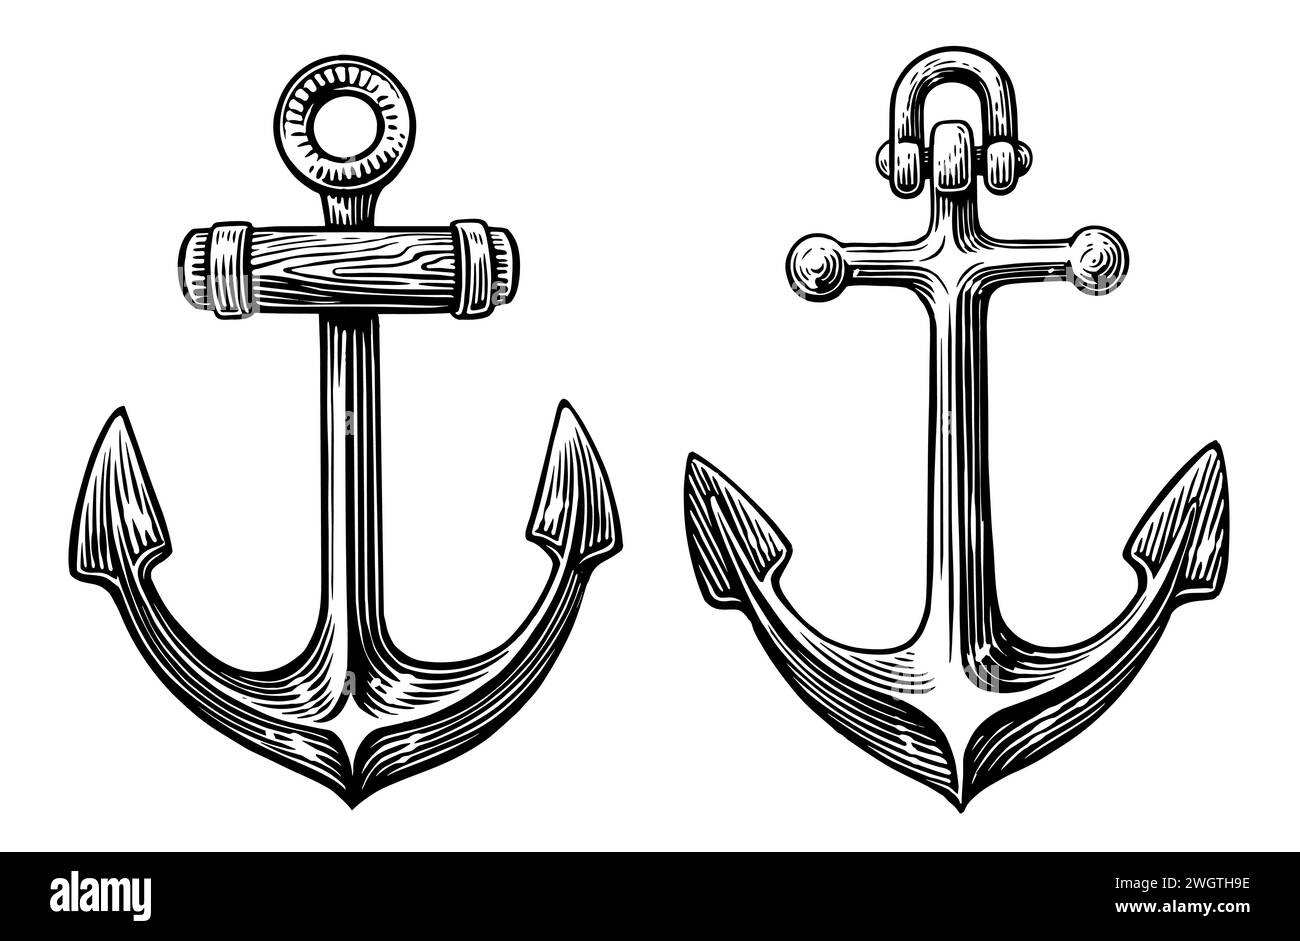 Ship anchor in engraving style. Hand drawn sketch vintage vector illustration Stock Vector